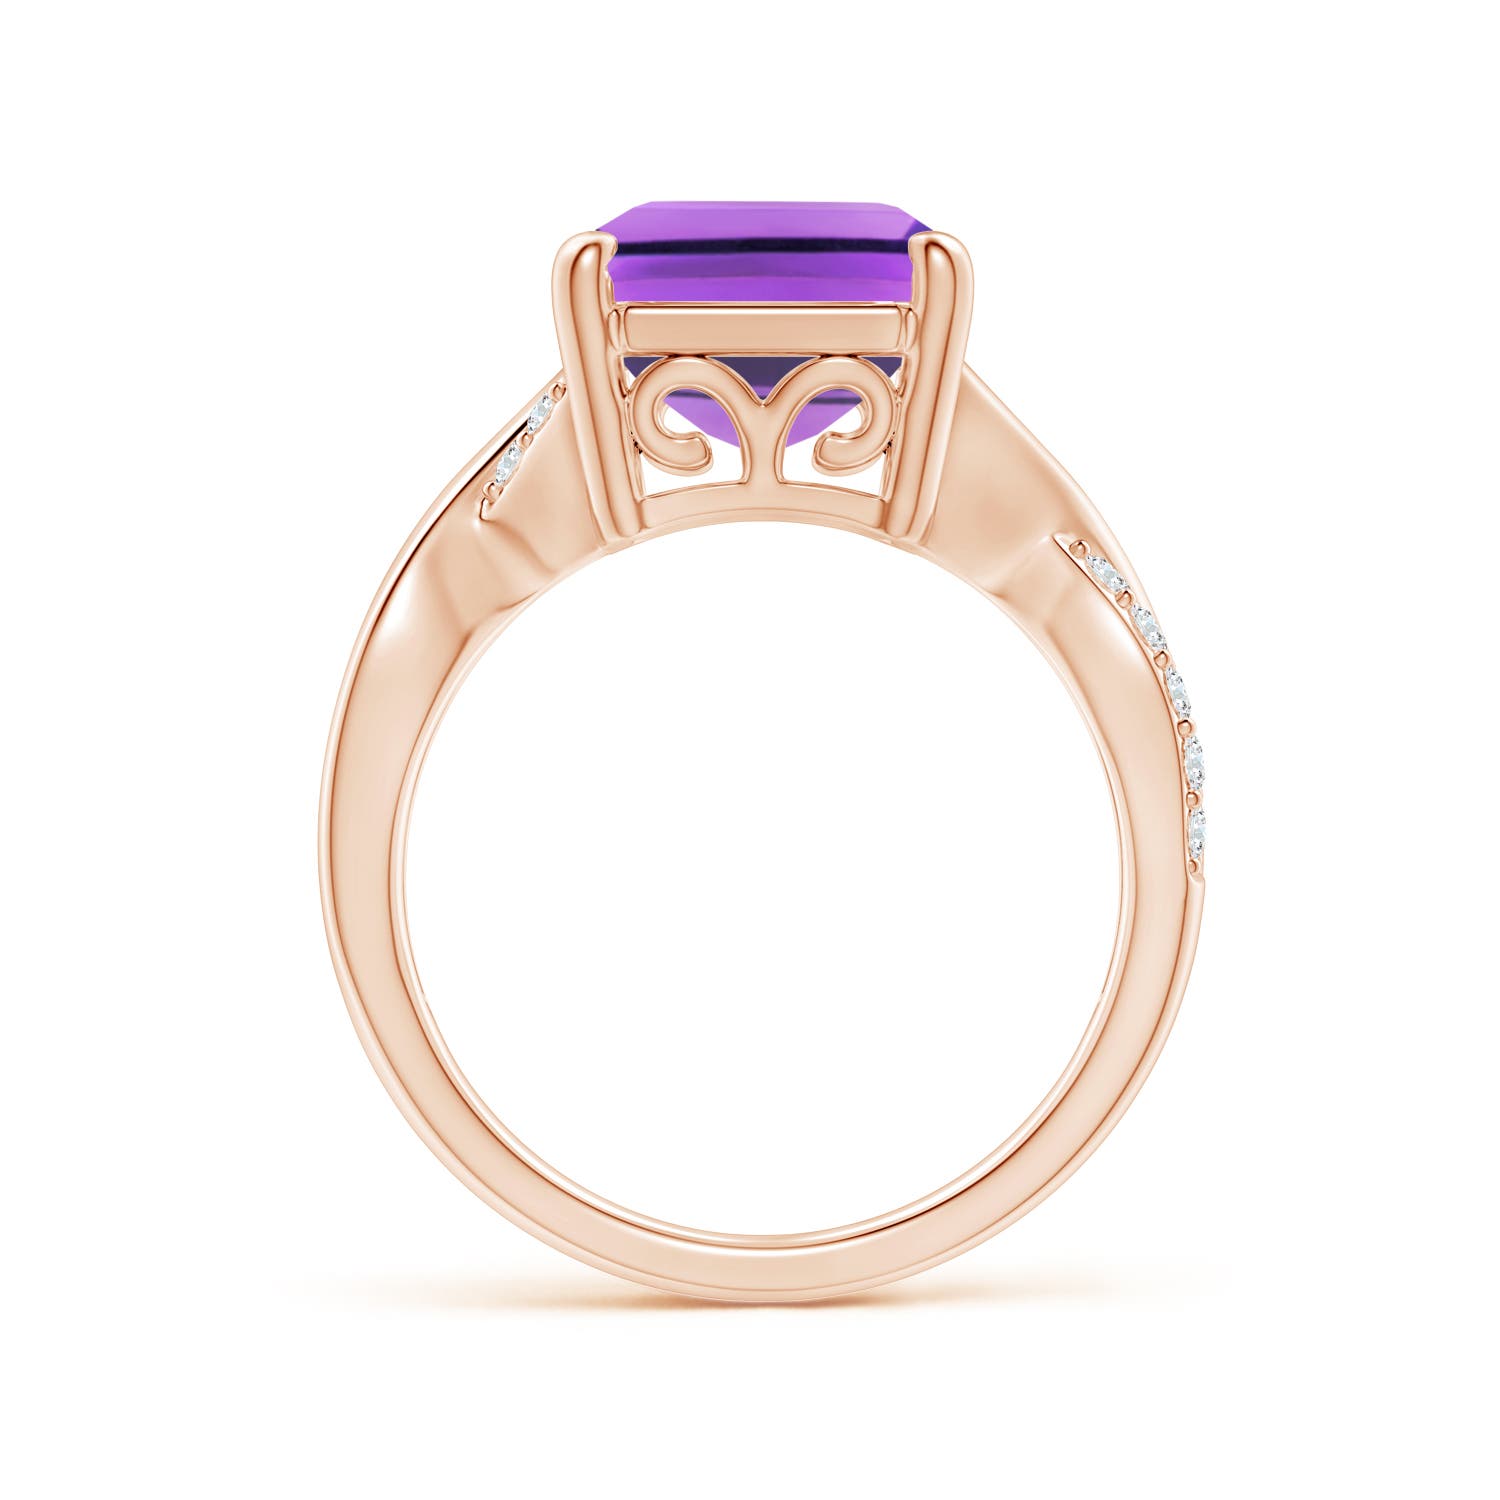 AA - Amethyst / 6.7 CT / 14 KT Rose Gold